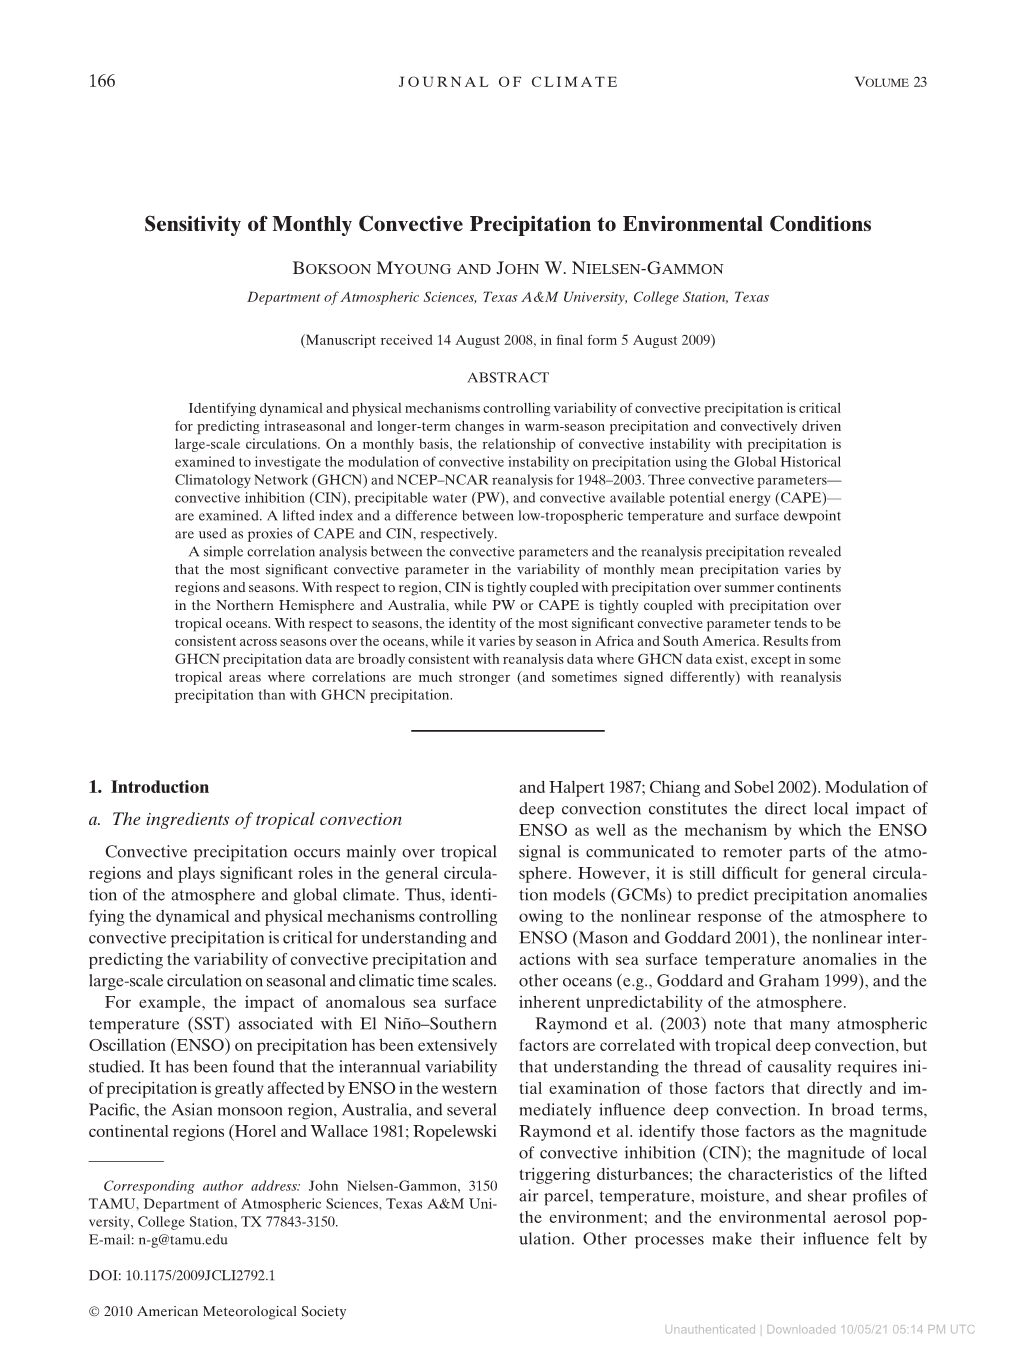 Sensitivity of Monthly Convective Precipitation to Environmental Conditions